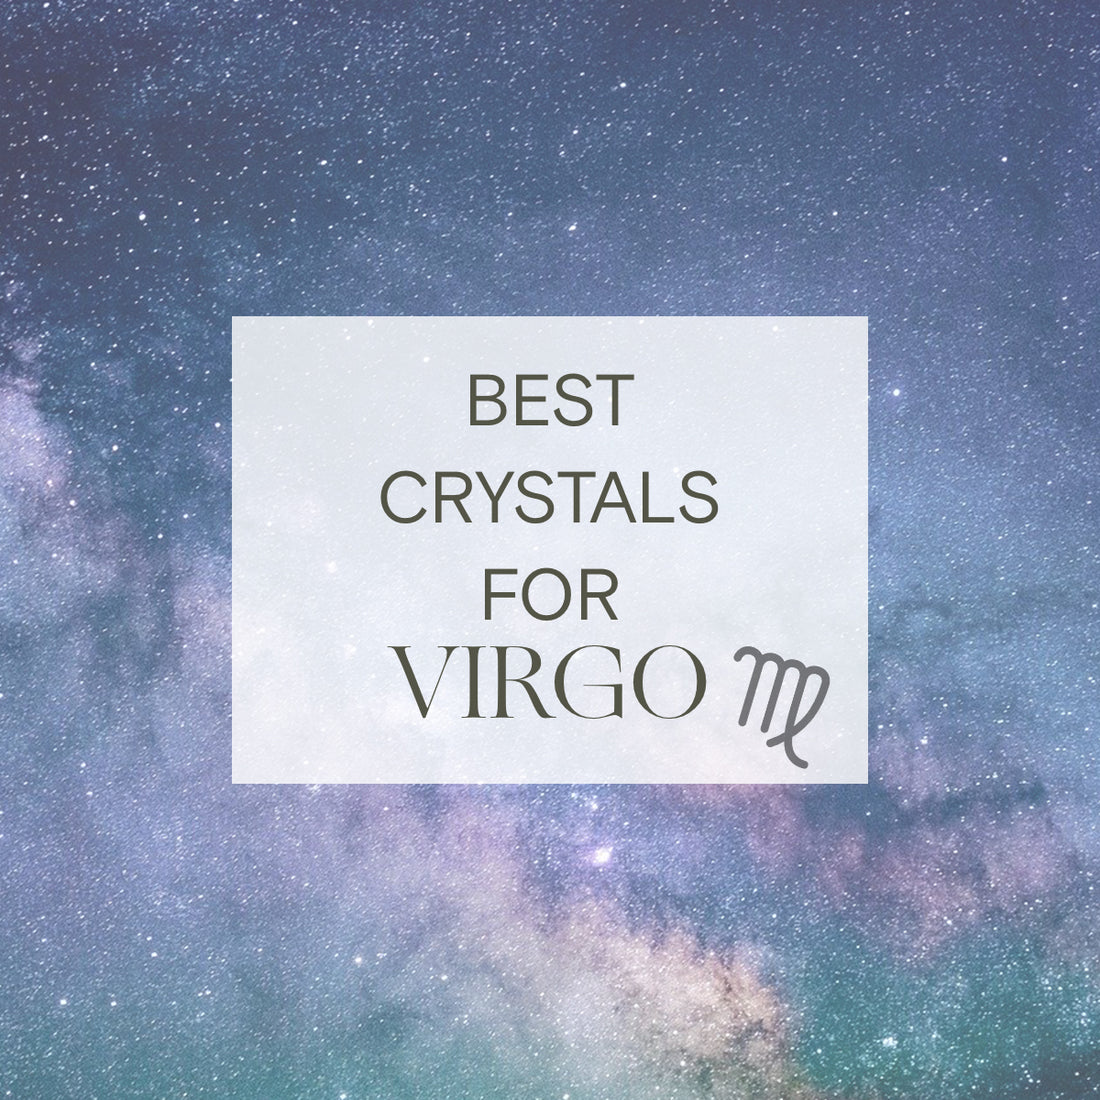 The Best Crystals for A Virgo